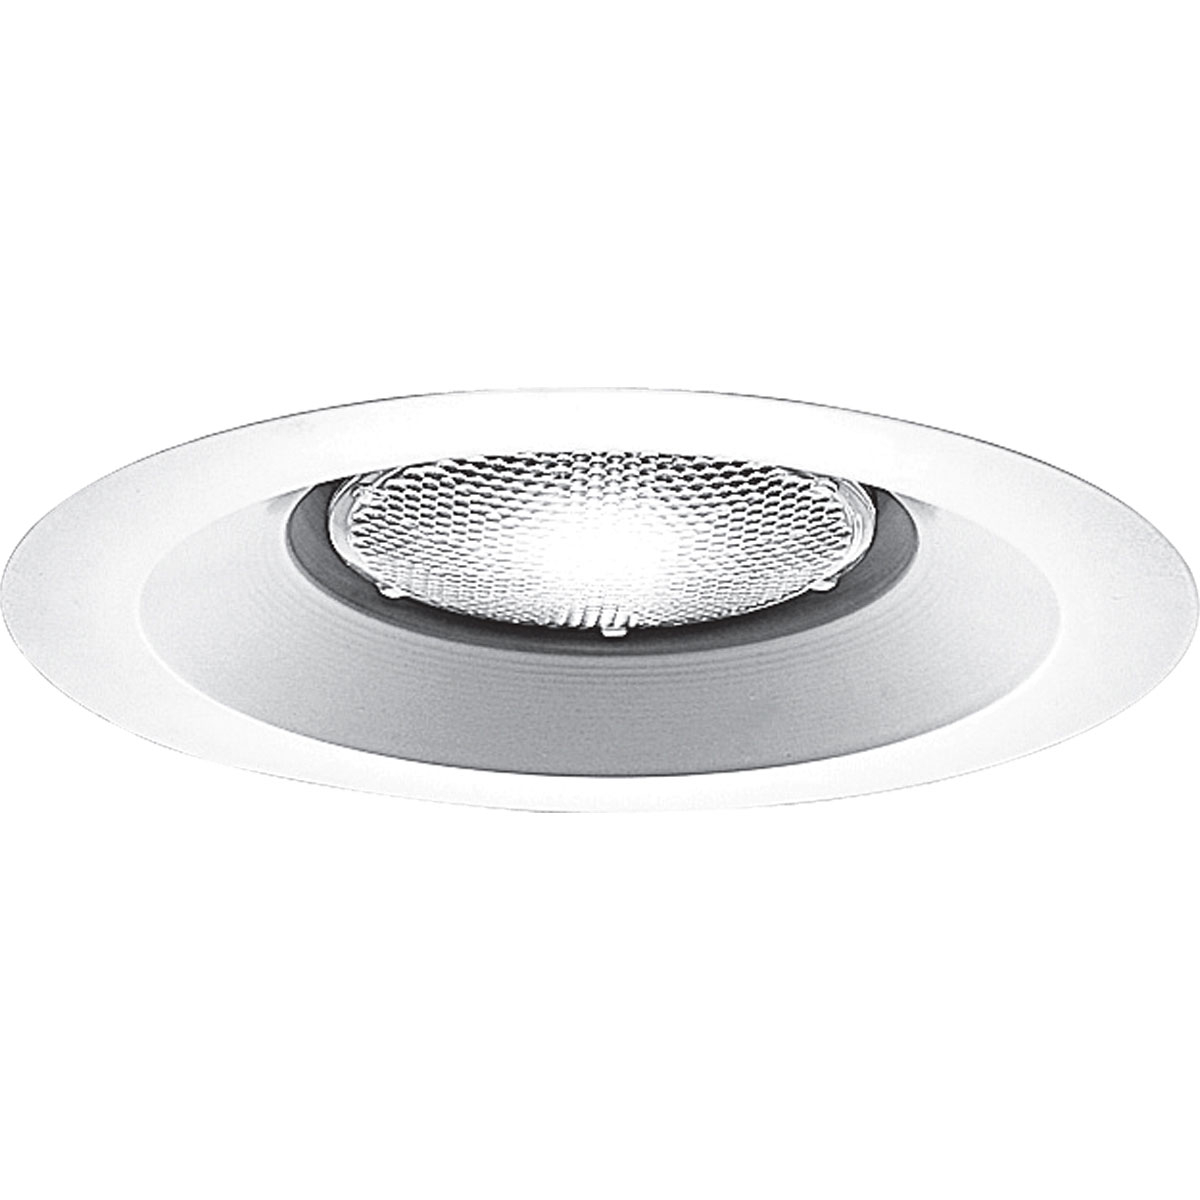 6 in Open Trim for shallow fixture in White finish with bright white powder painted flange. For insulated ceilings. 7-3/4 in outside diameter. White finish.